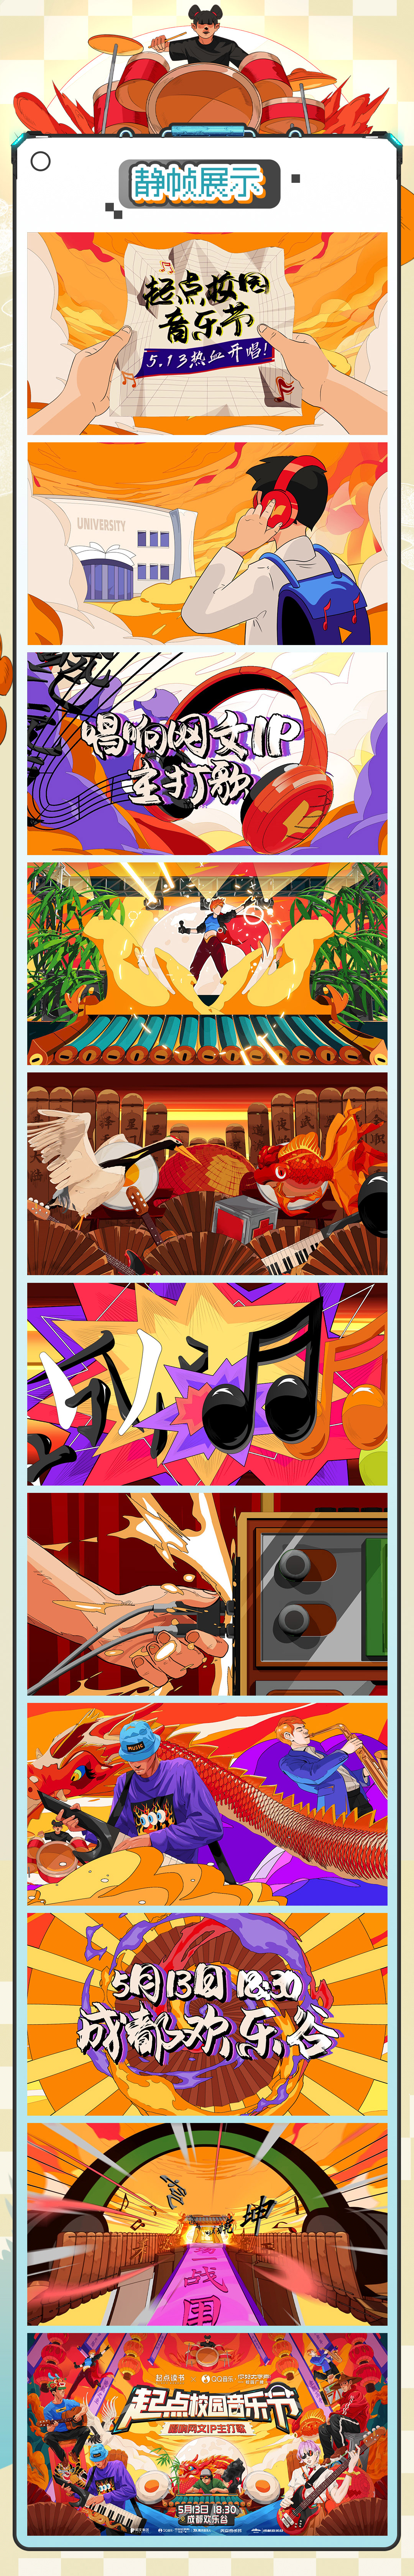 design visual identity frame by frame cartoon after effects cinema 4d musician china 2D